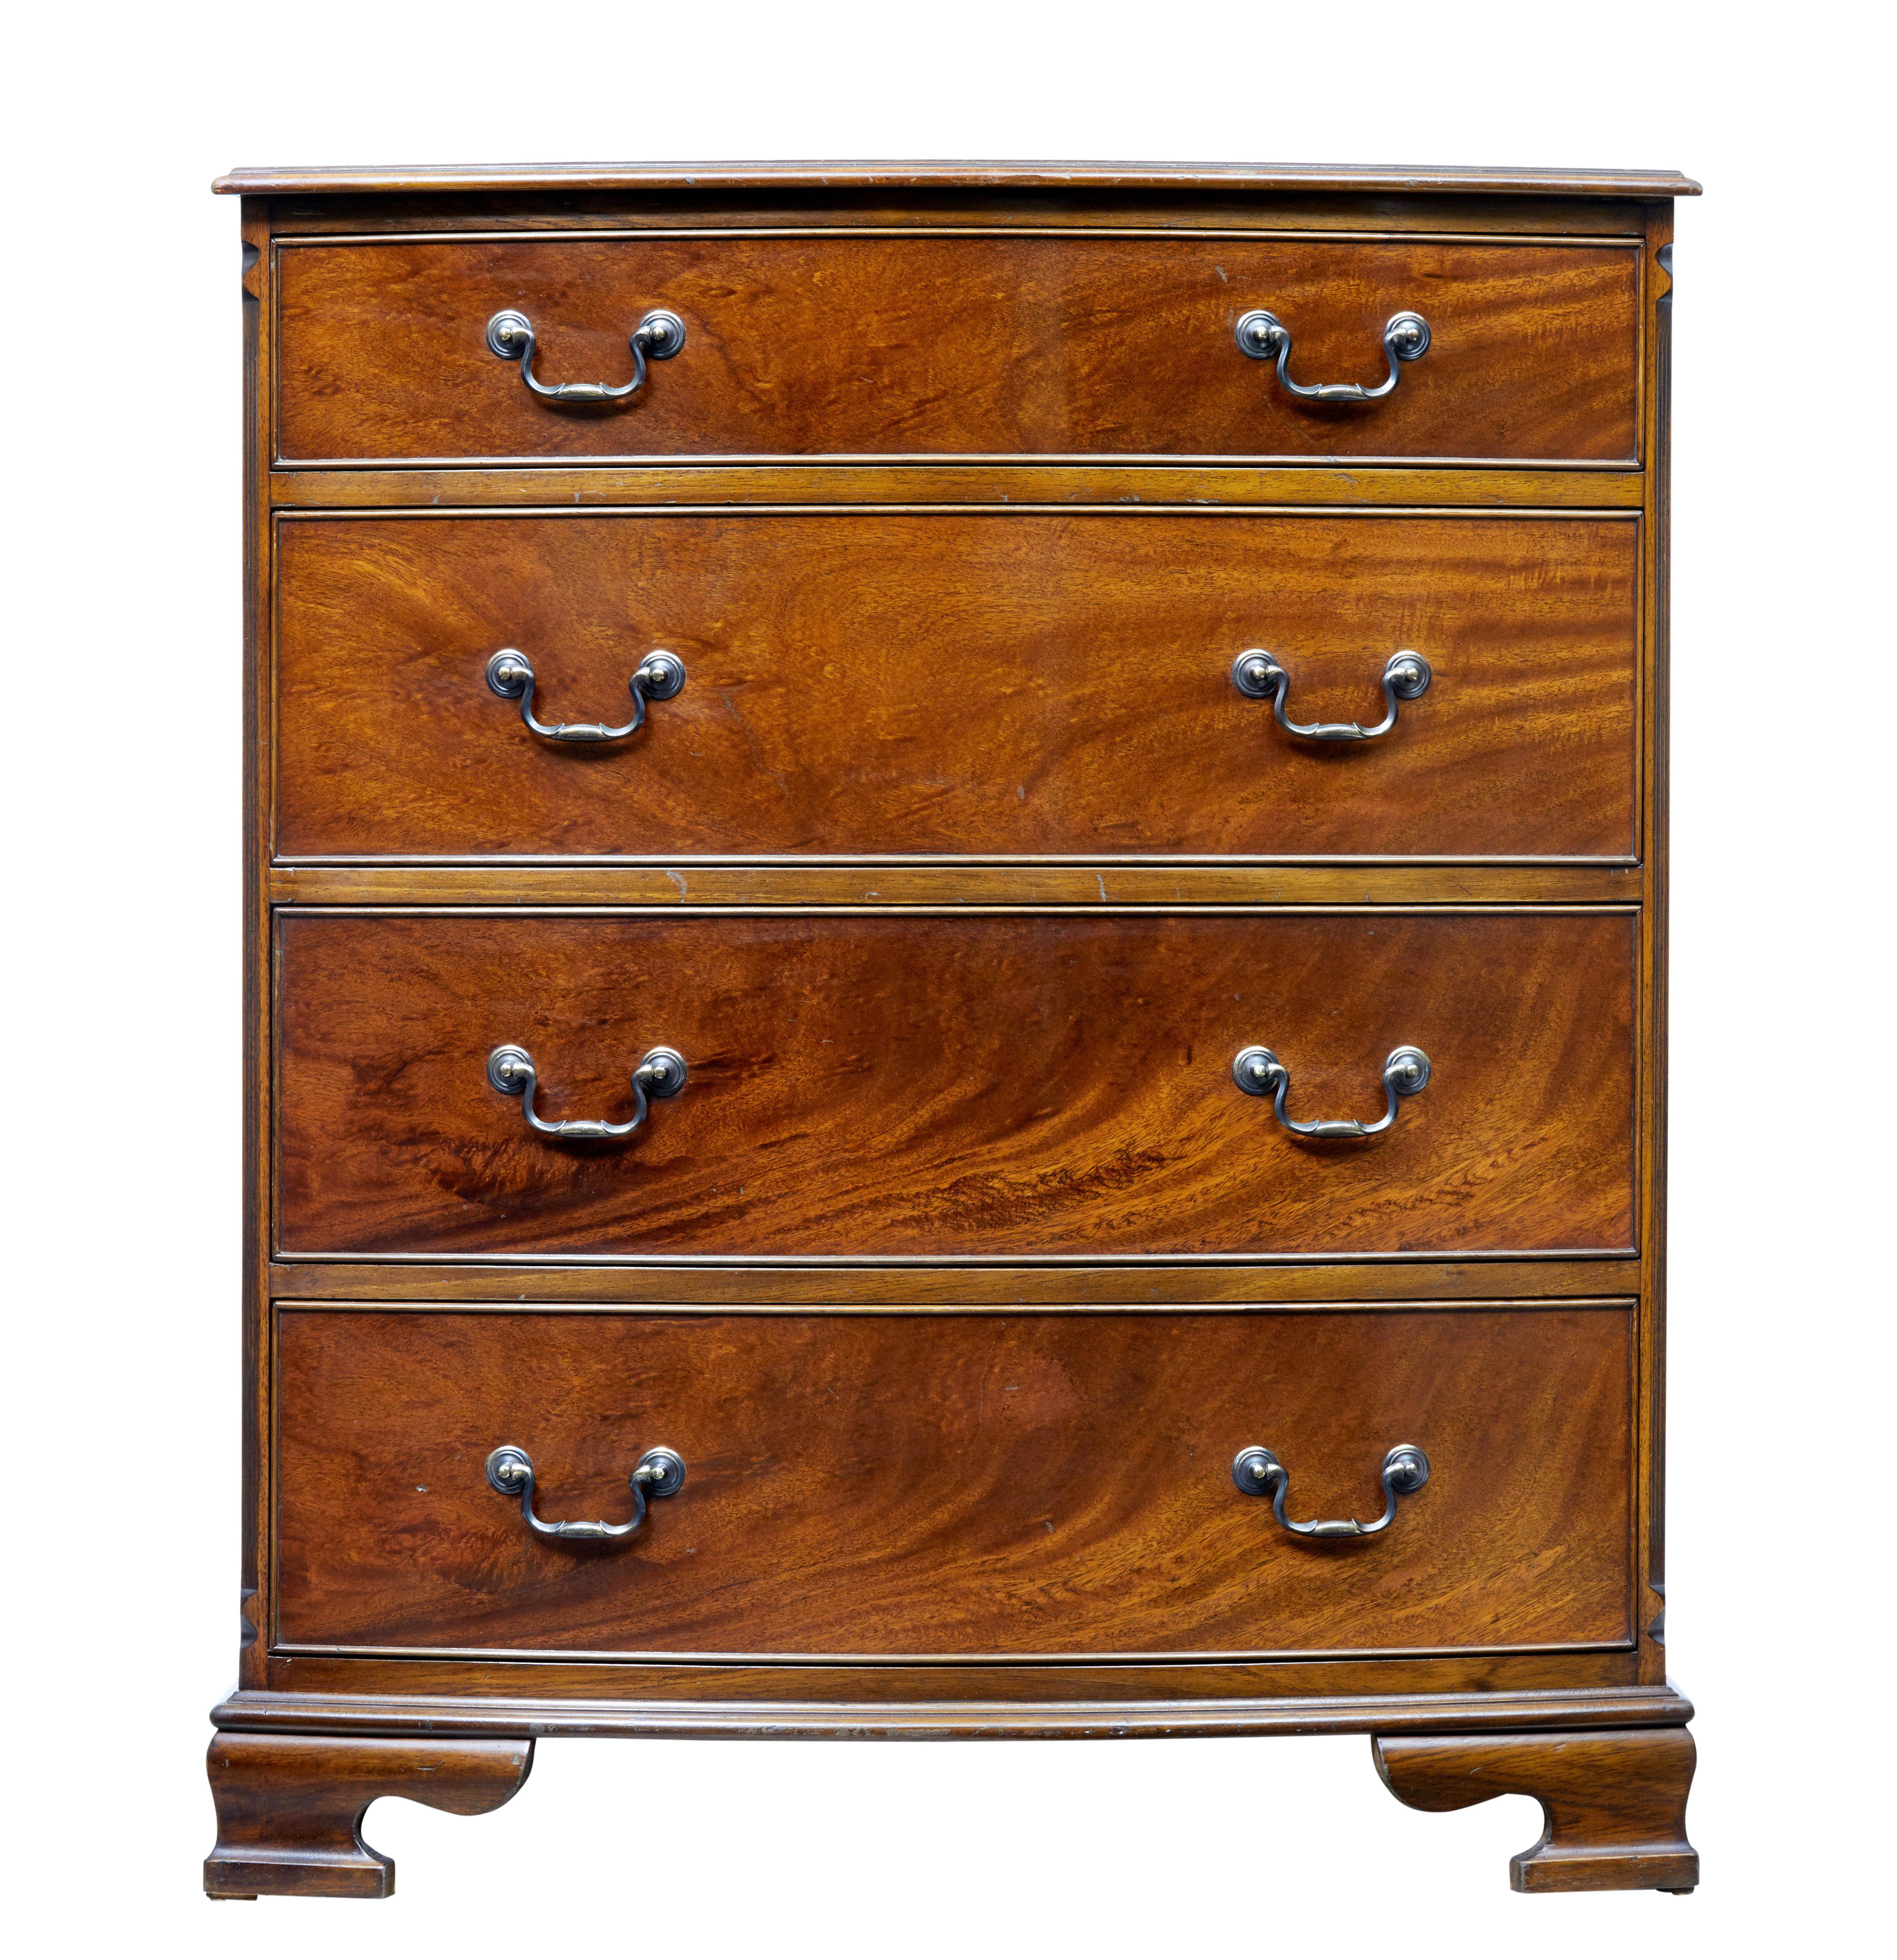 Good quality mahogany chest of drawers by well known English furniture makers Adam Richwood of London.

Copy of a Georgian design, 4 drawers fitted with swan neck handles and cock beading around the edges. Canted corners. Standing on ogee bracket